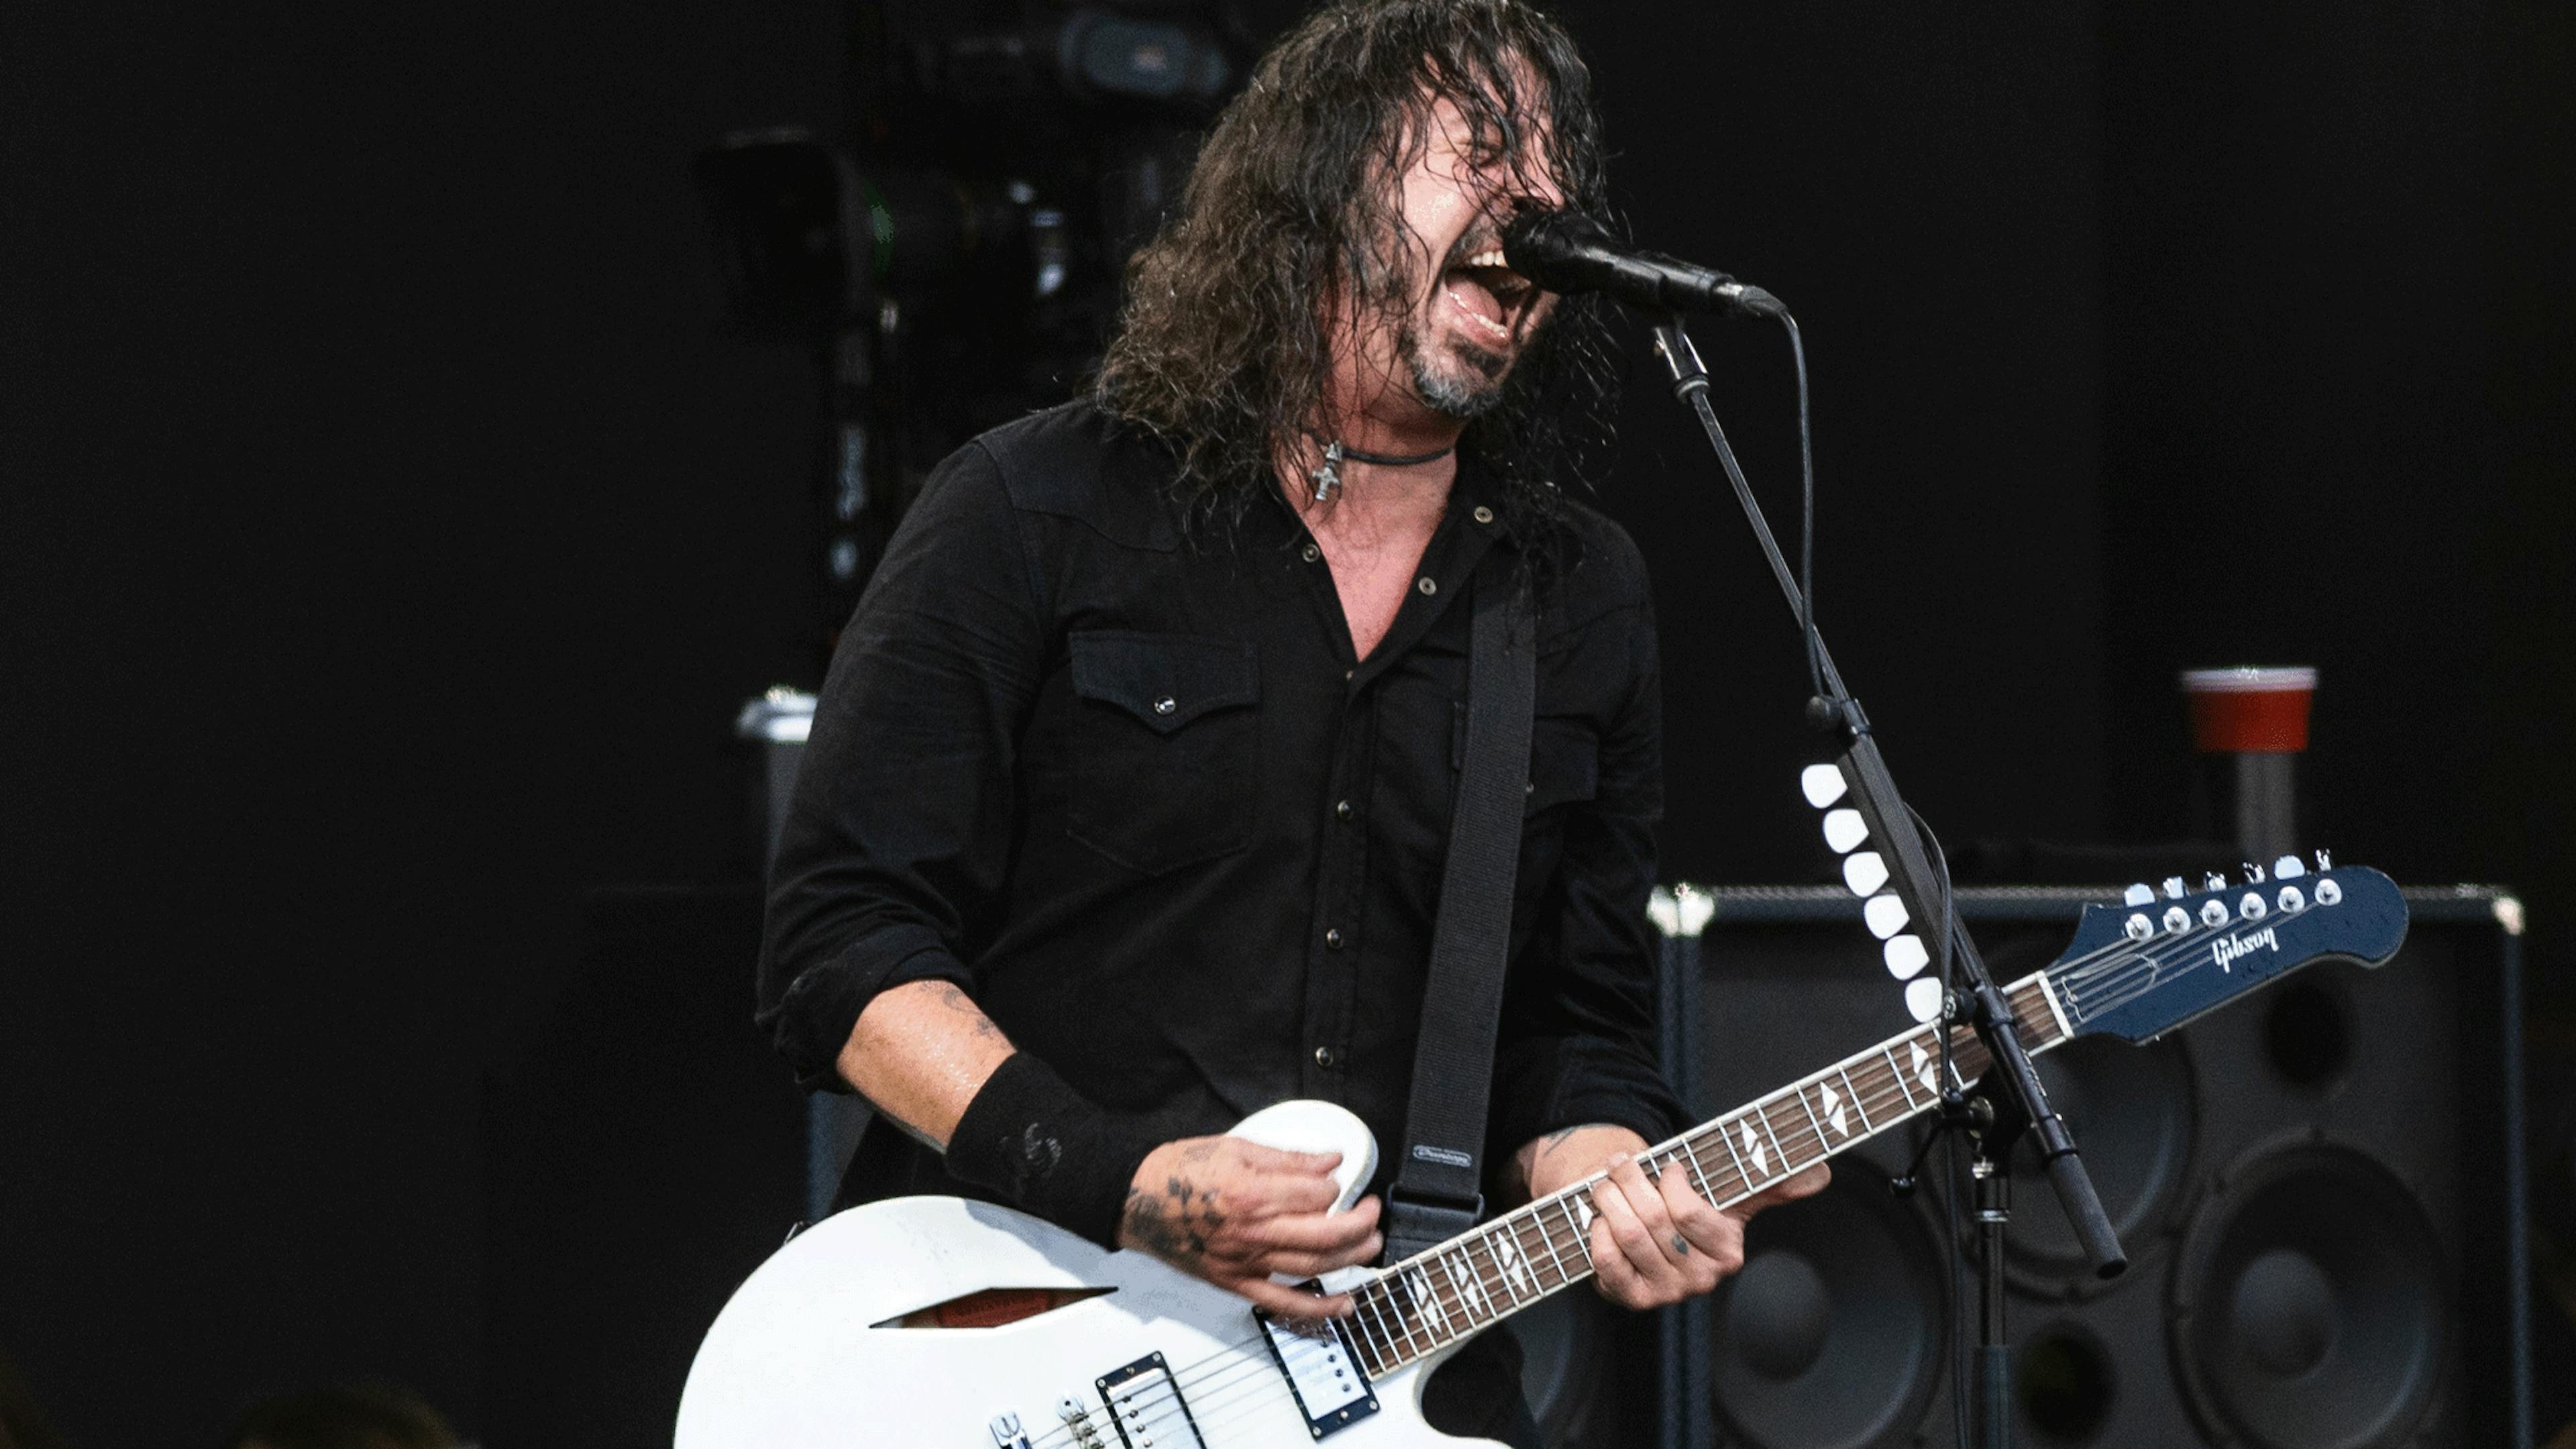 There’s been “unprecedented demand” for Foo Fighters pre-sale tickets today